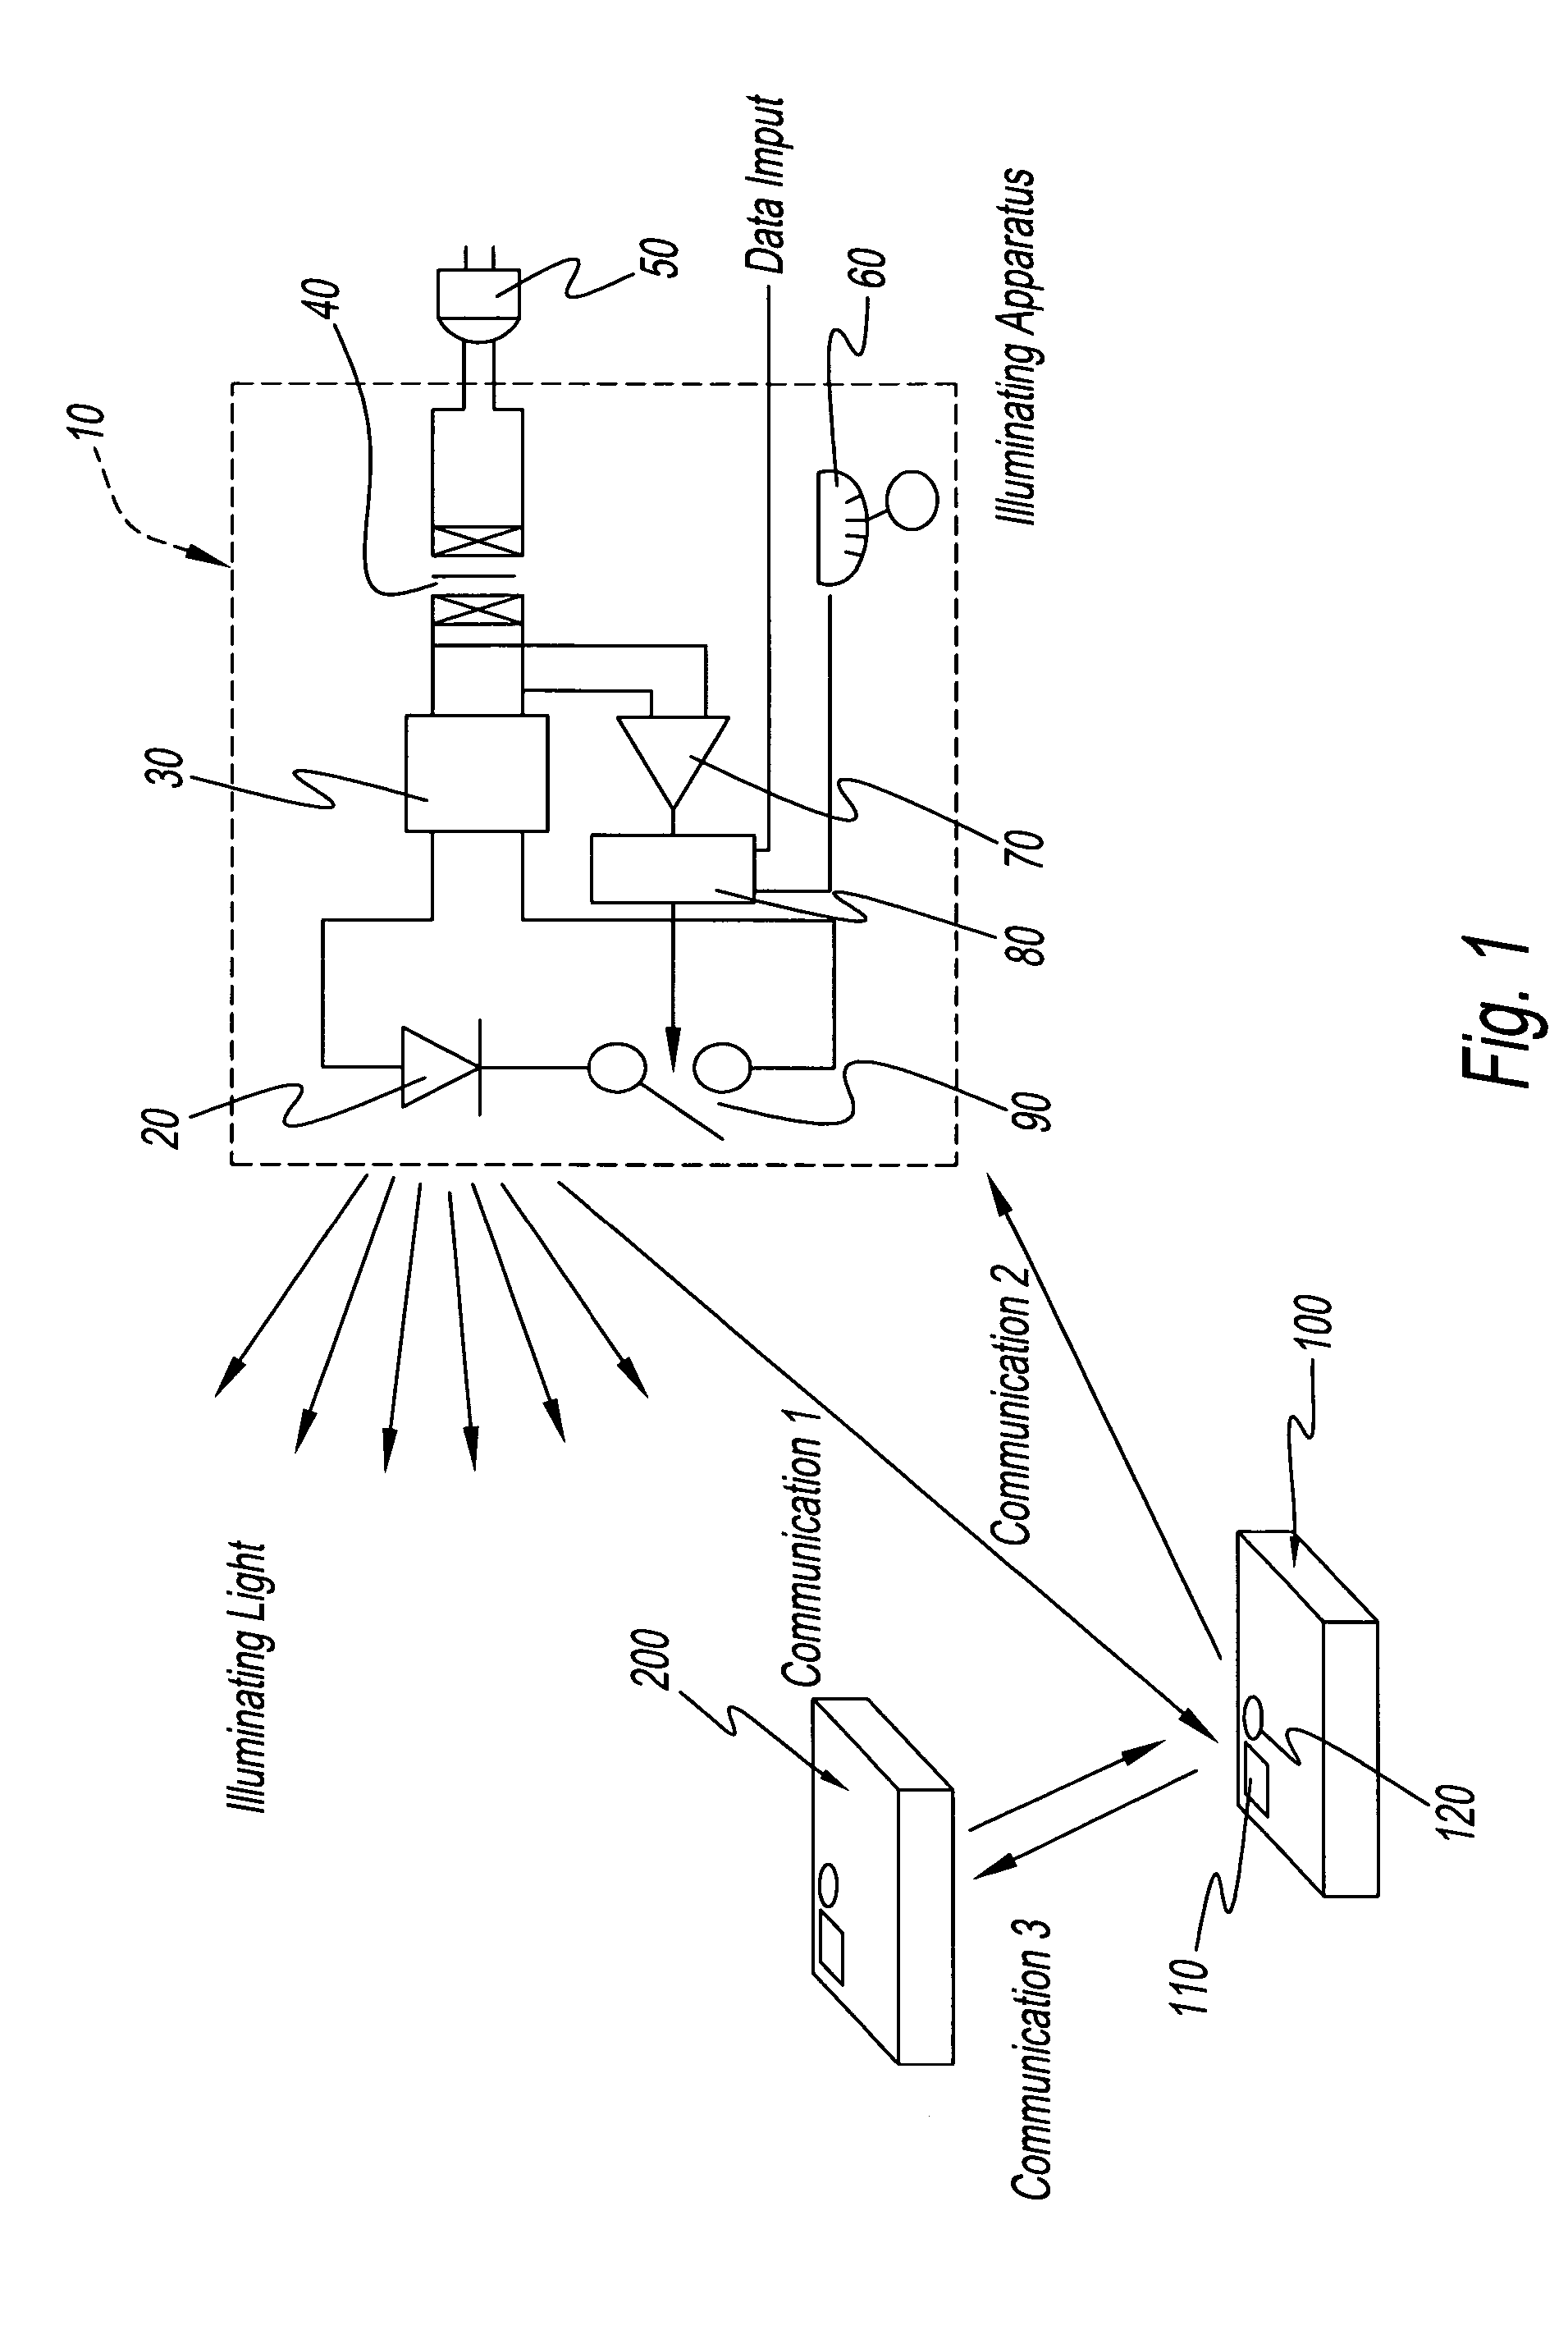 Light communication system and illumination apparatus therefor